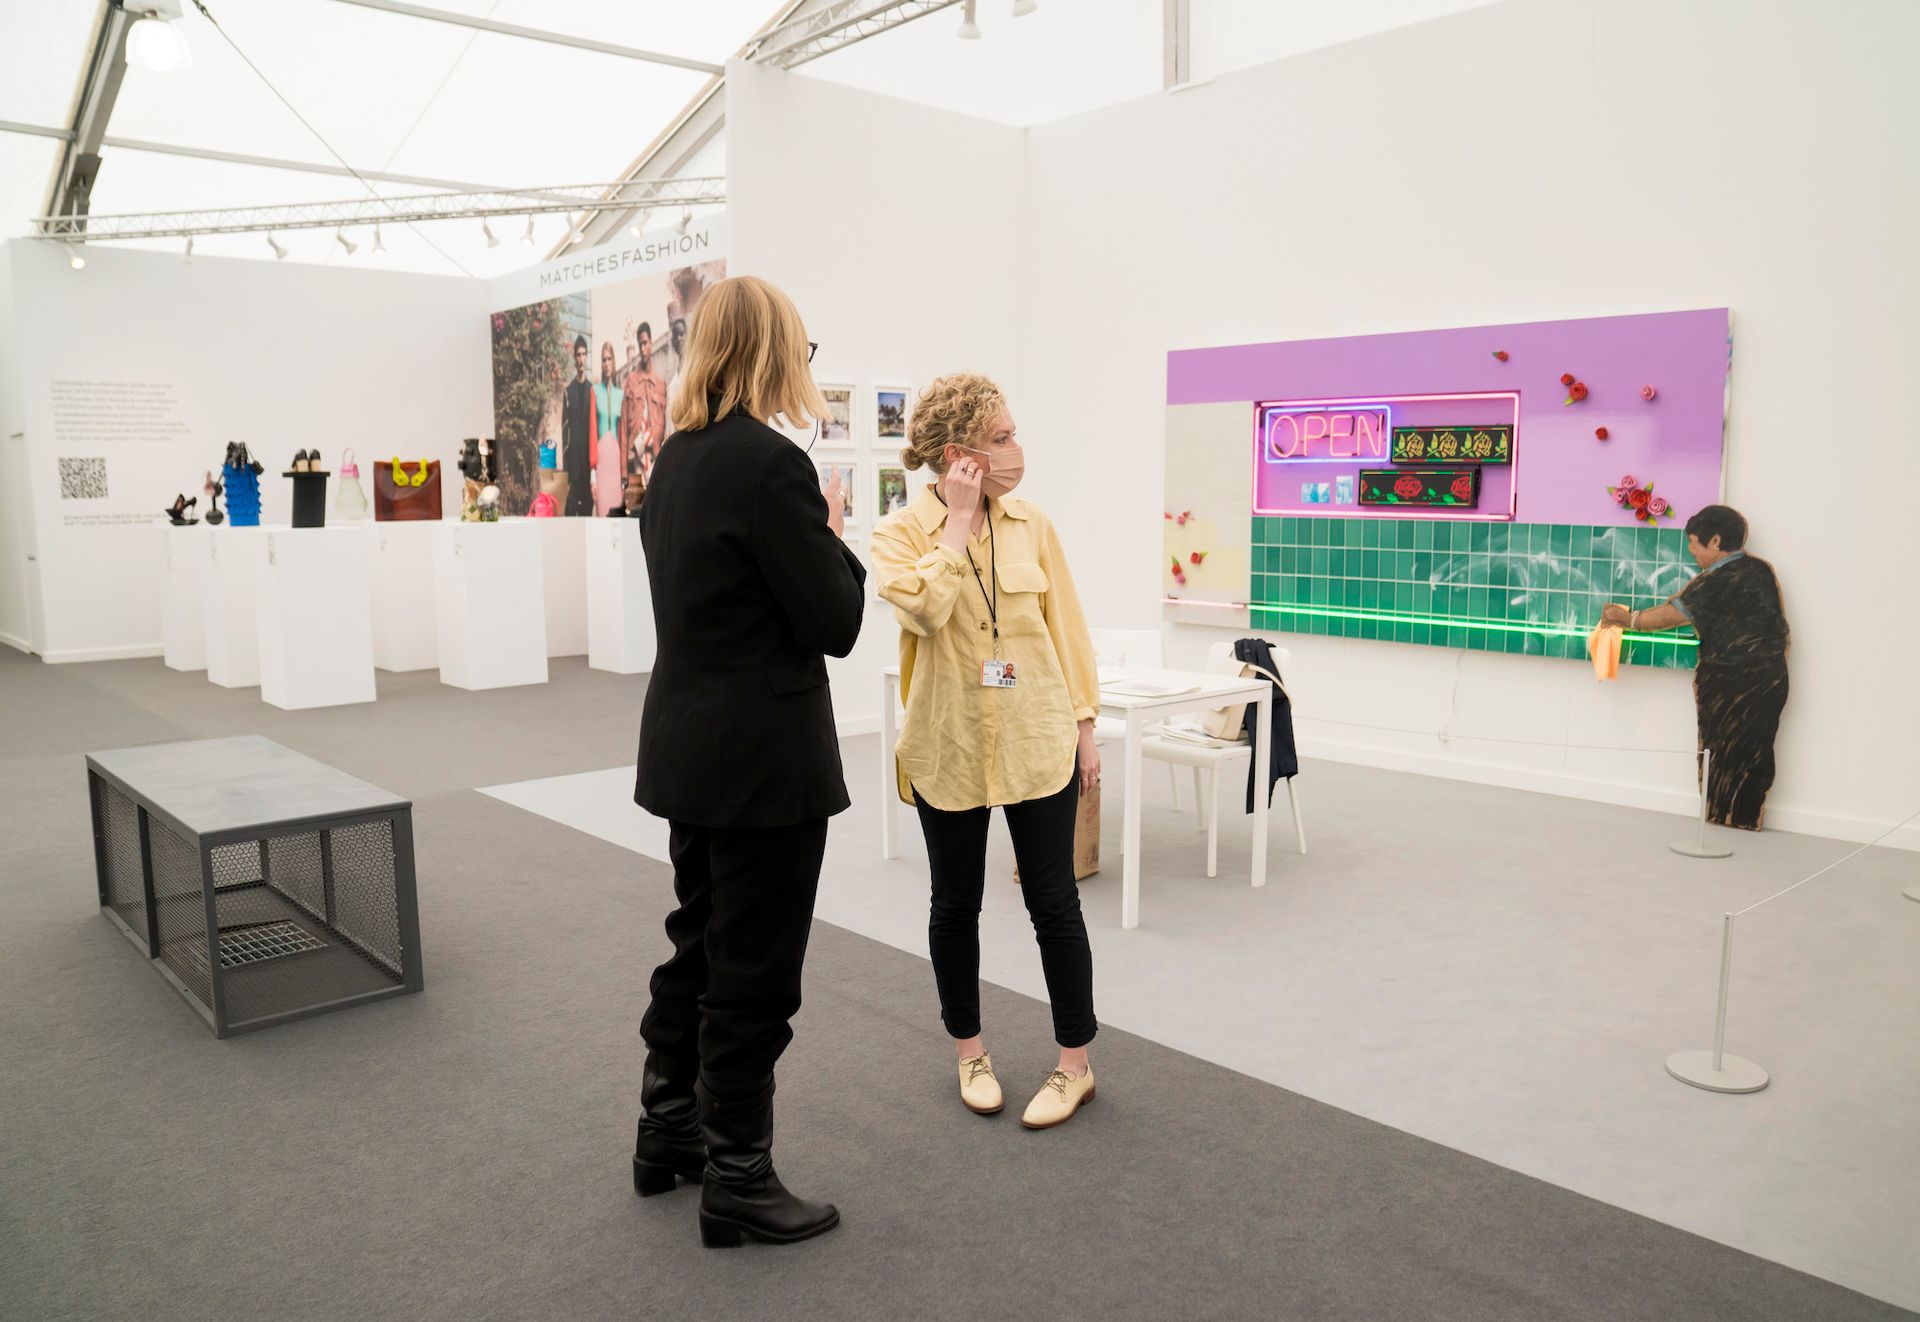 Patrick Martinez and Jay Lynn Gomez's Labor of Love, Stucco (2022) in the Charlie James stand at Frieze Los Angeles 2022. Photo: Eric Thayer for The Art Newspaper